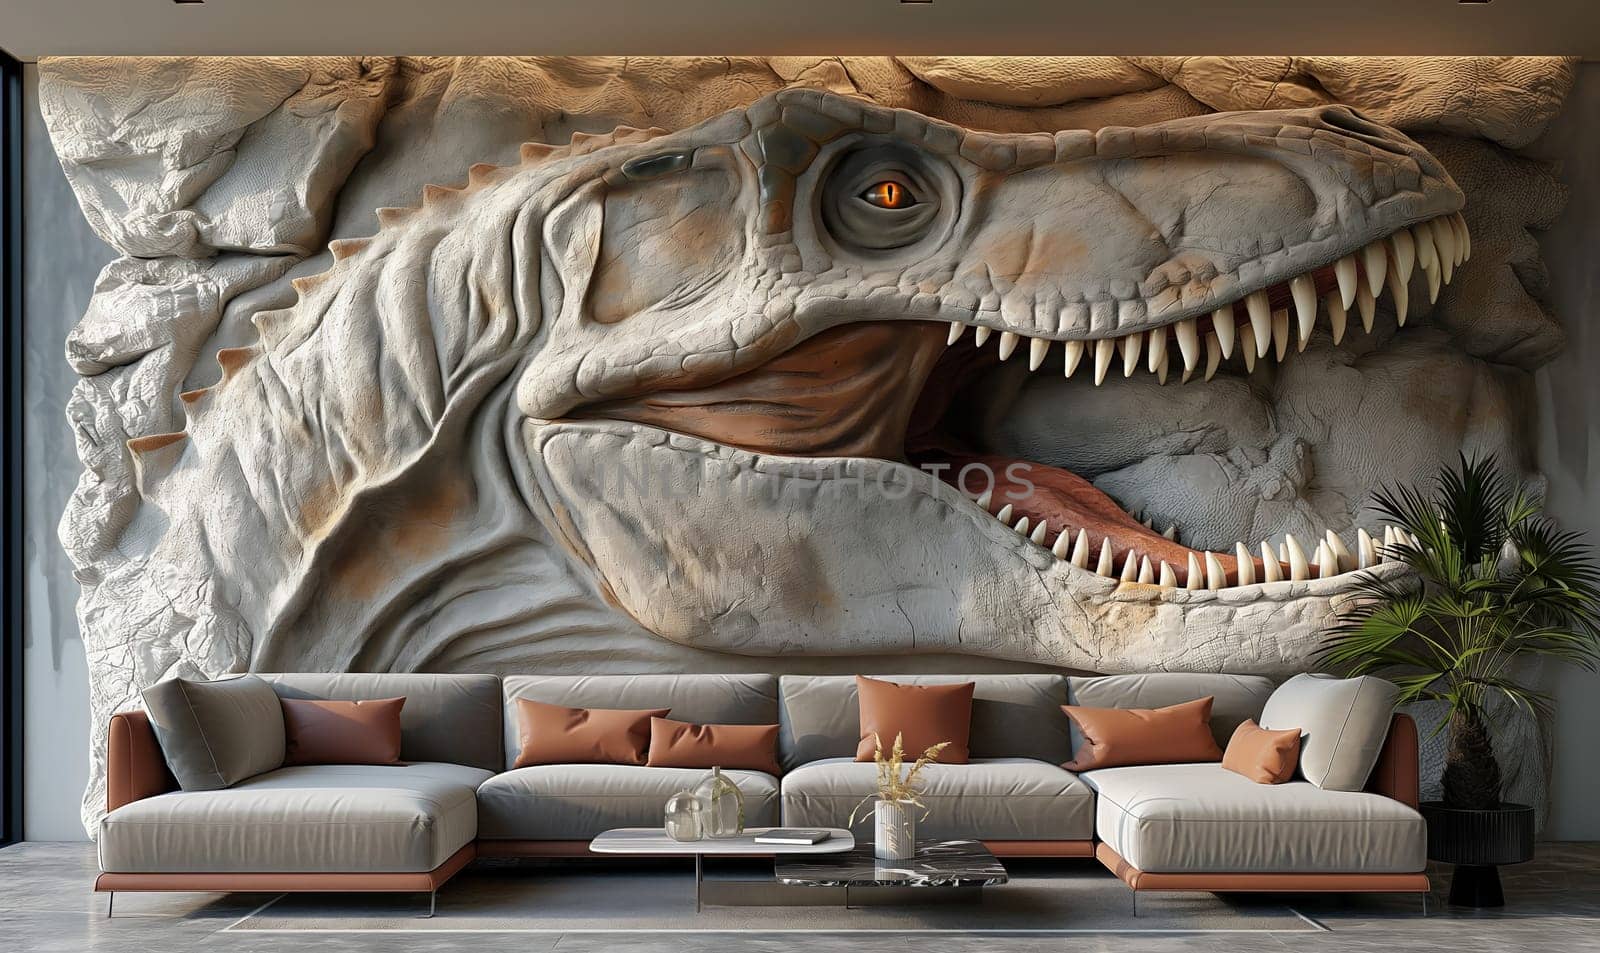 3d wallpaper, dinosaur made of stone on the wall in the room. by Fischeron